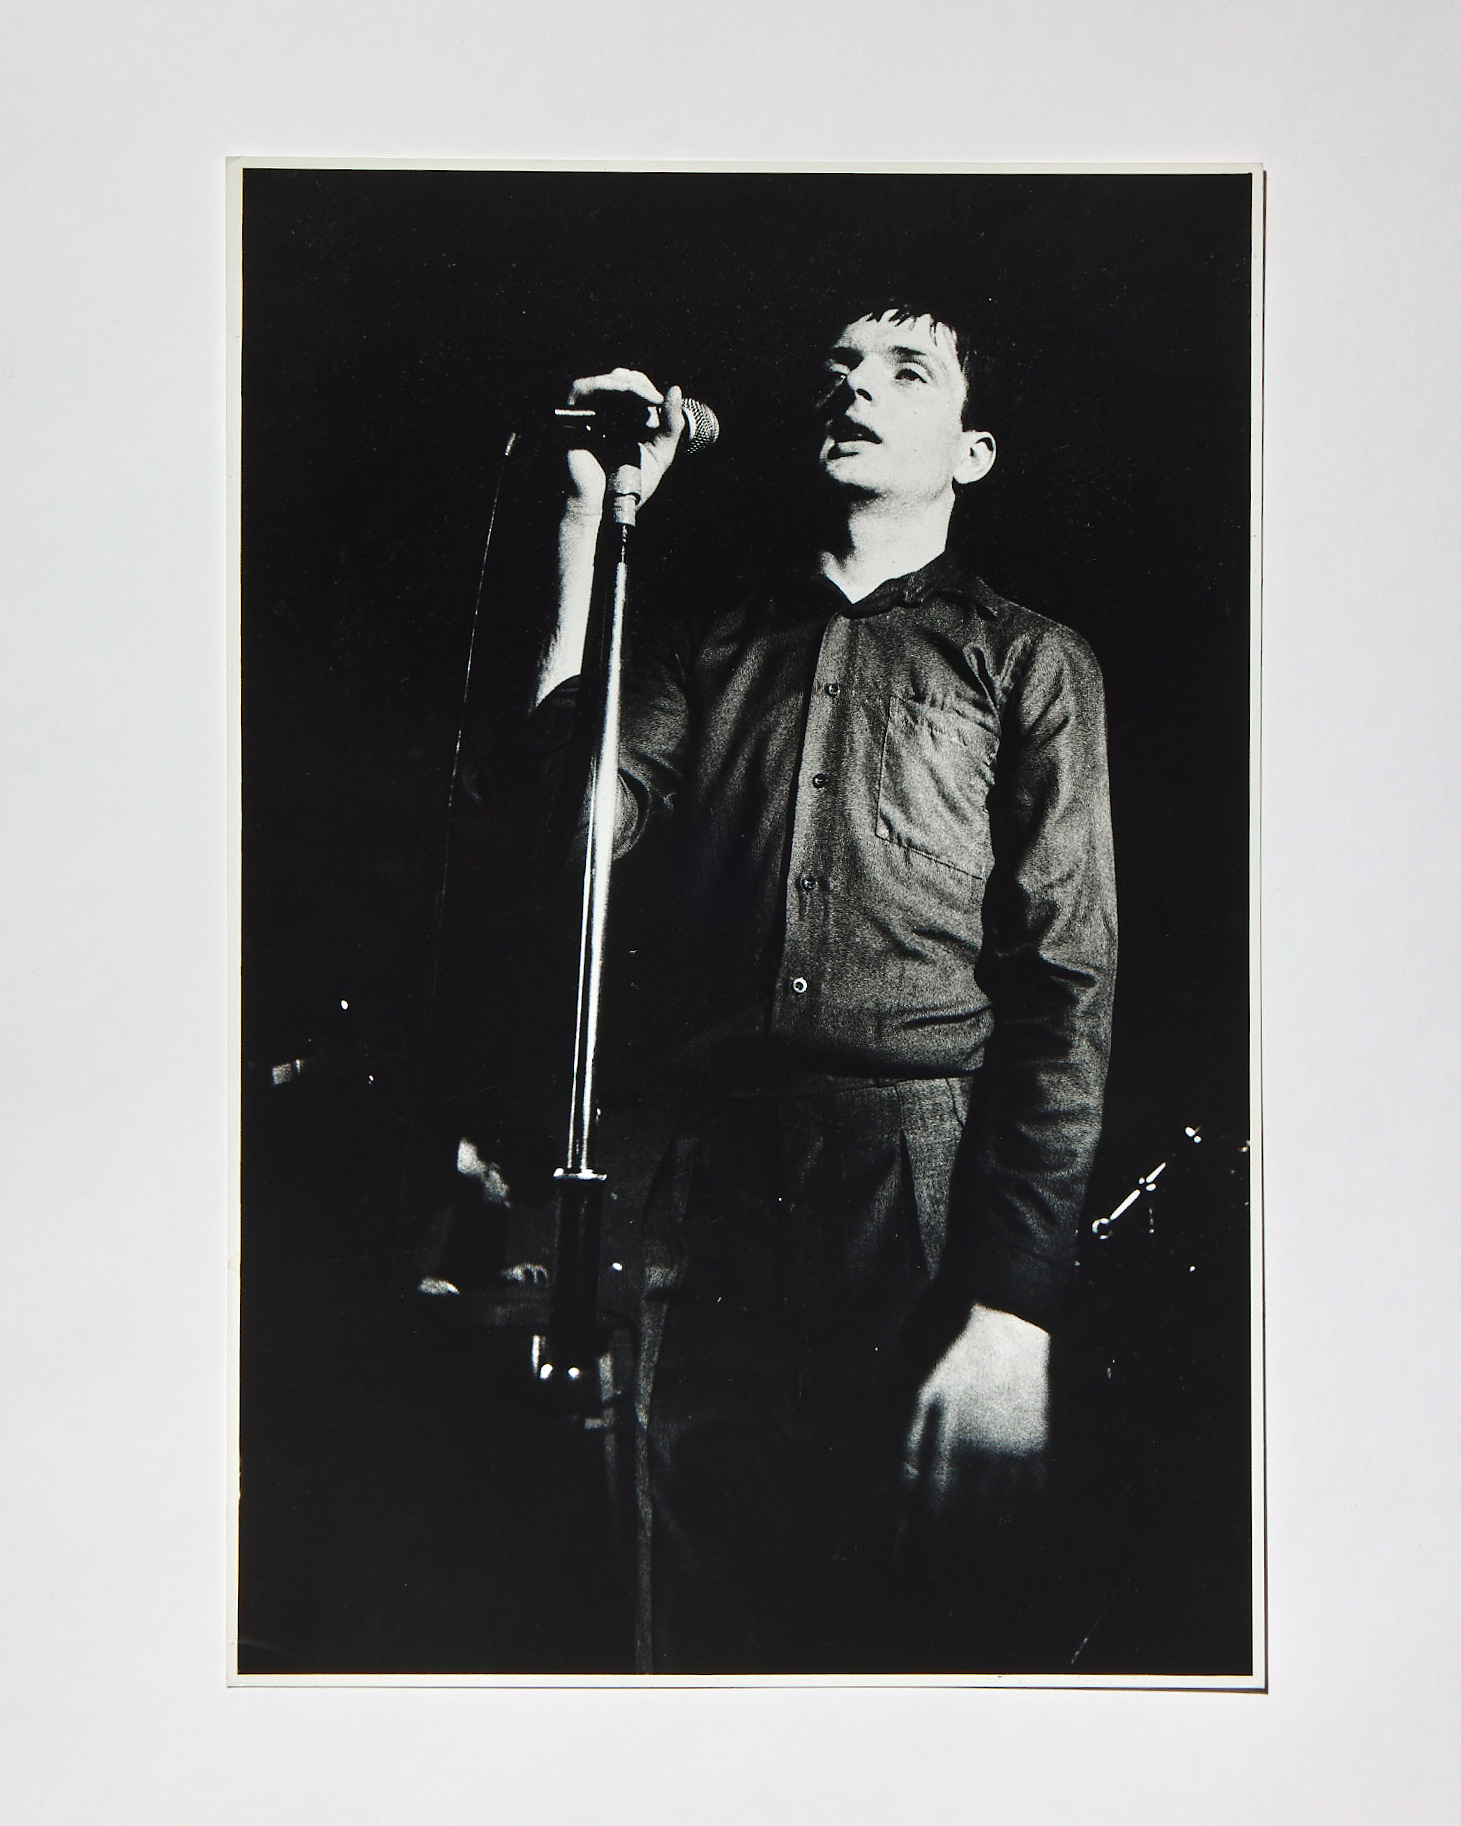 a black and white portrait of ian curtis of joy division on stage holding a microphone by kevin cummins